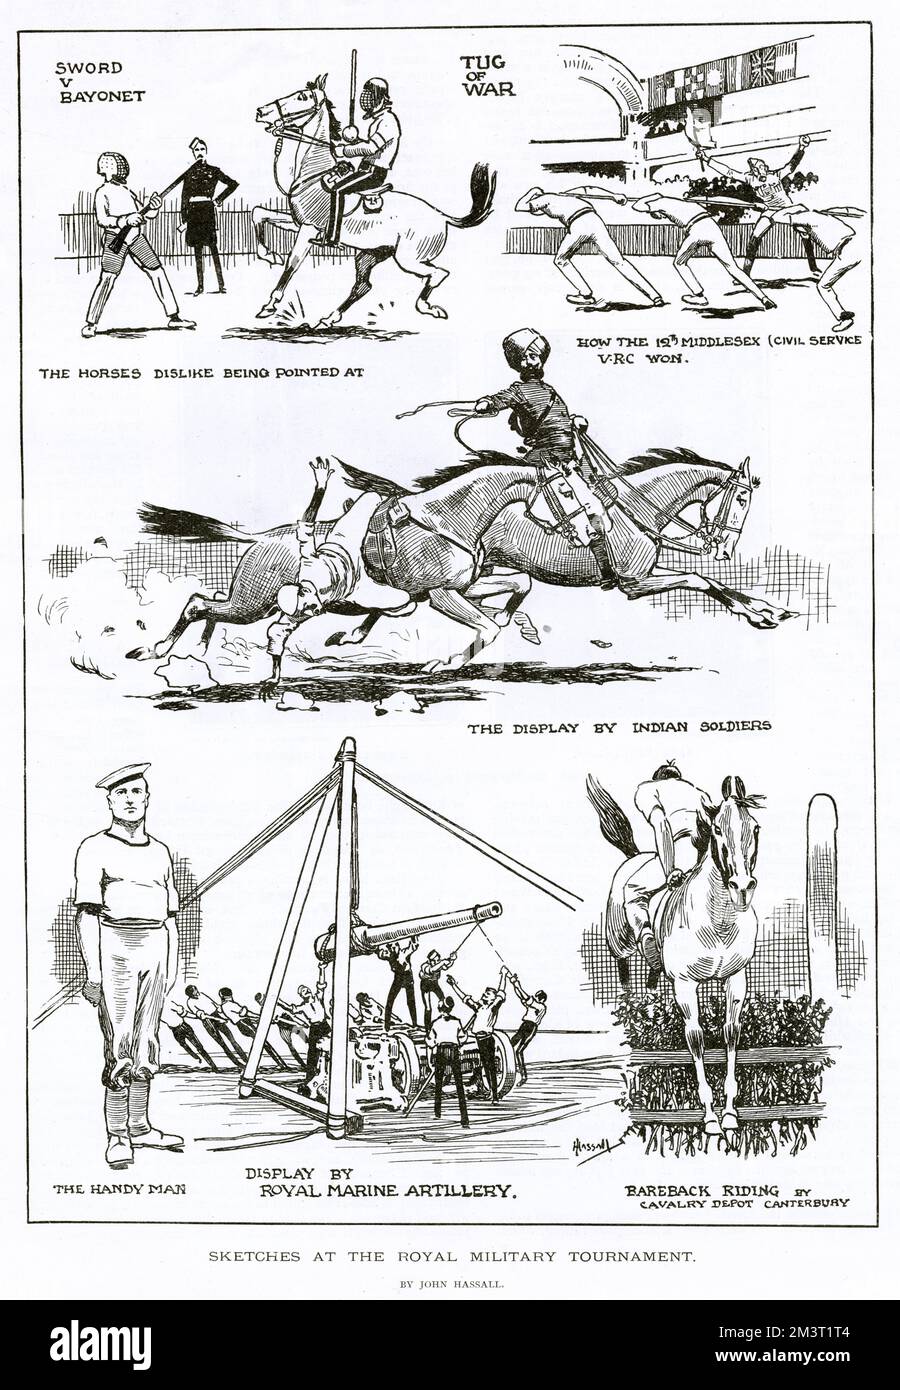 Sketches at the Royal Military Tournament by John Hassall. Stock Photo